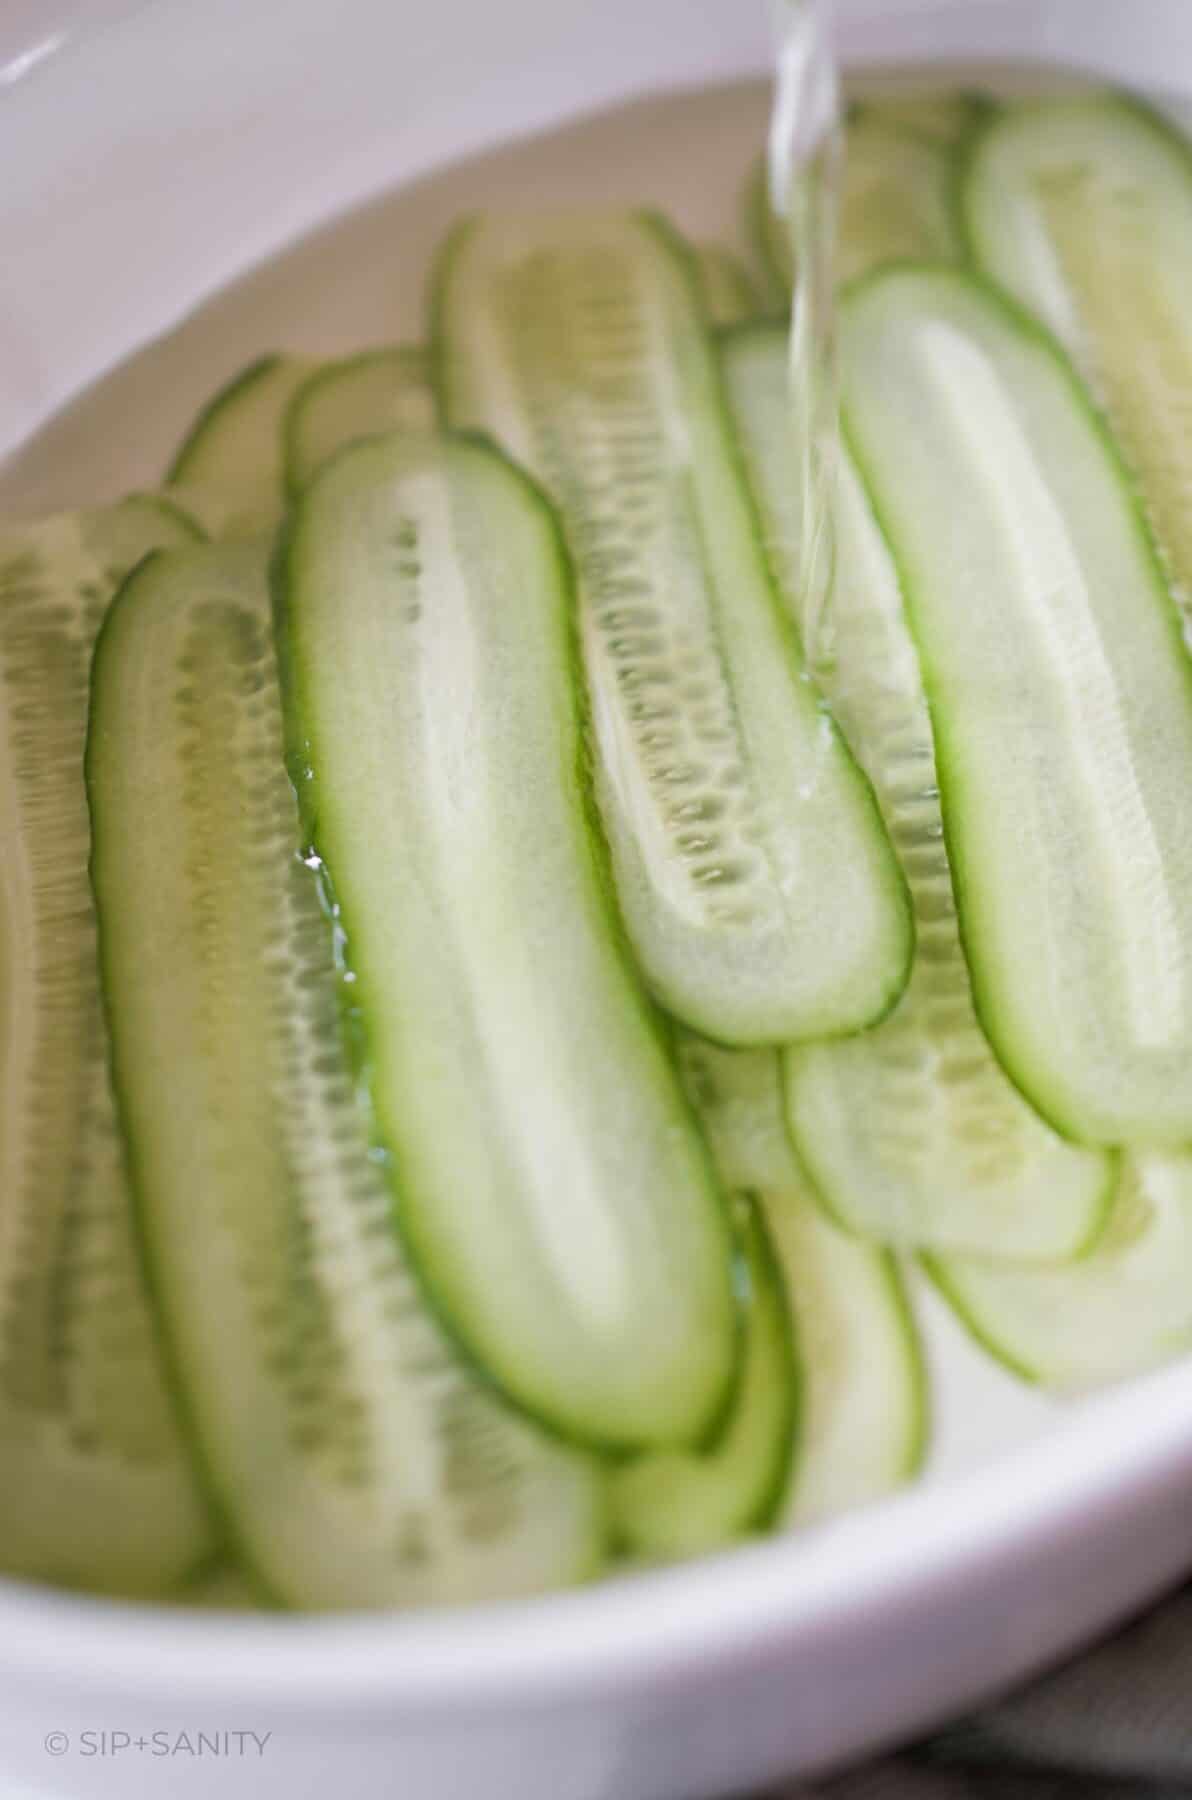 Thin slices of cucumber in a shallow dish with pickling liquid being poured over.